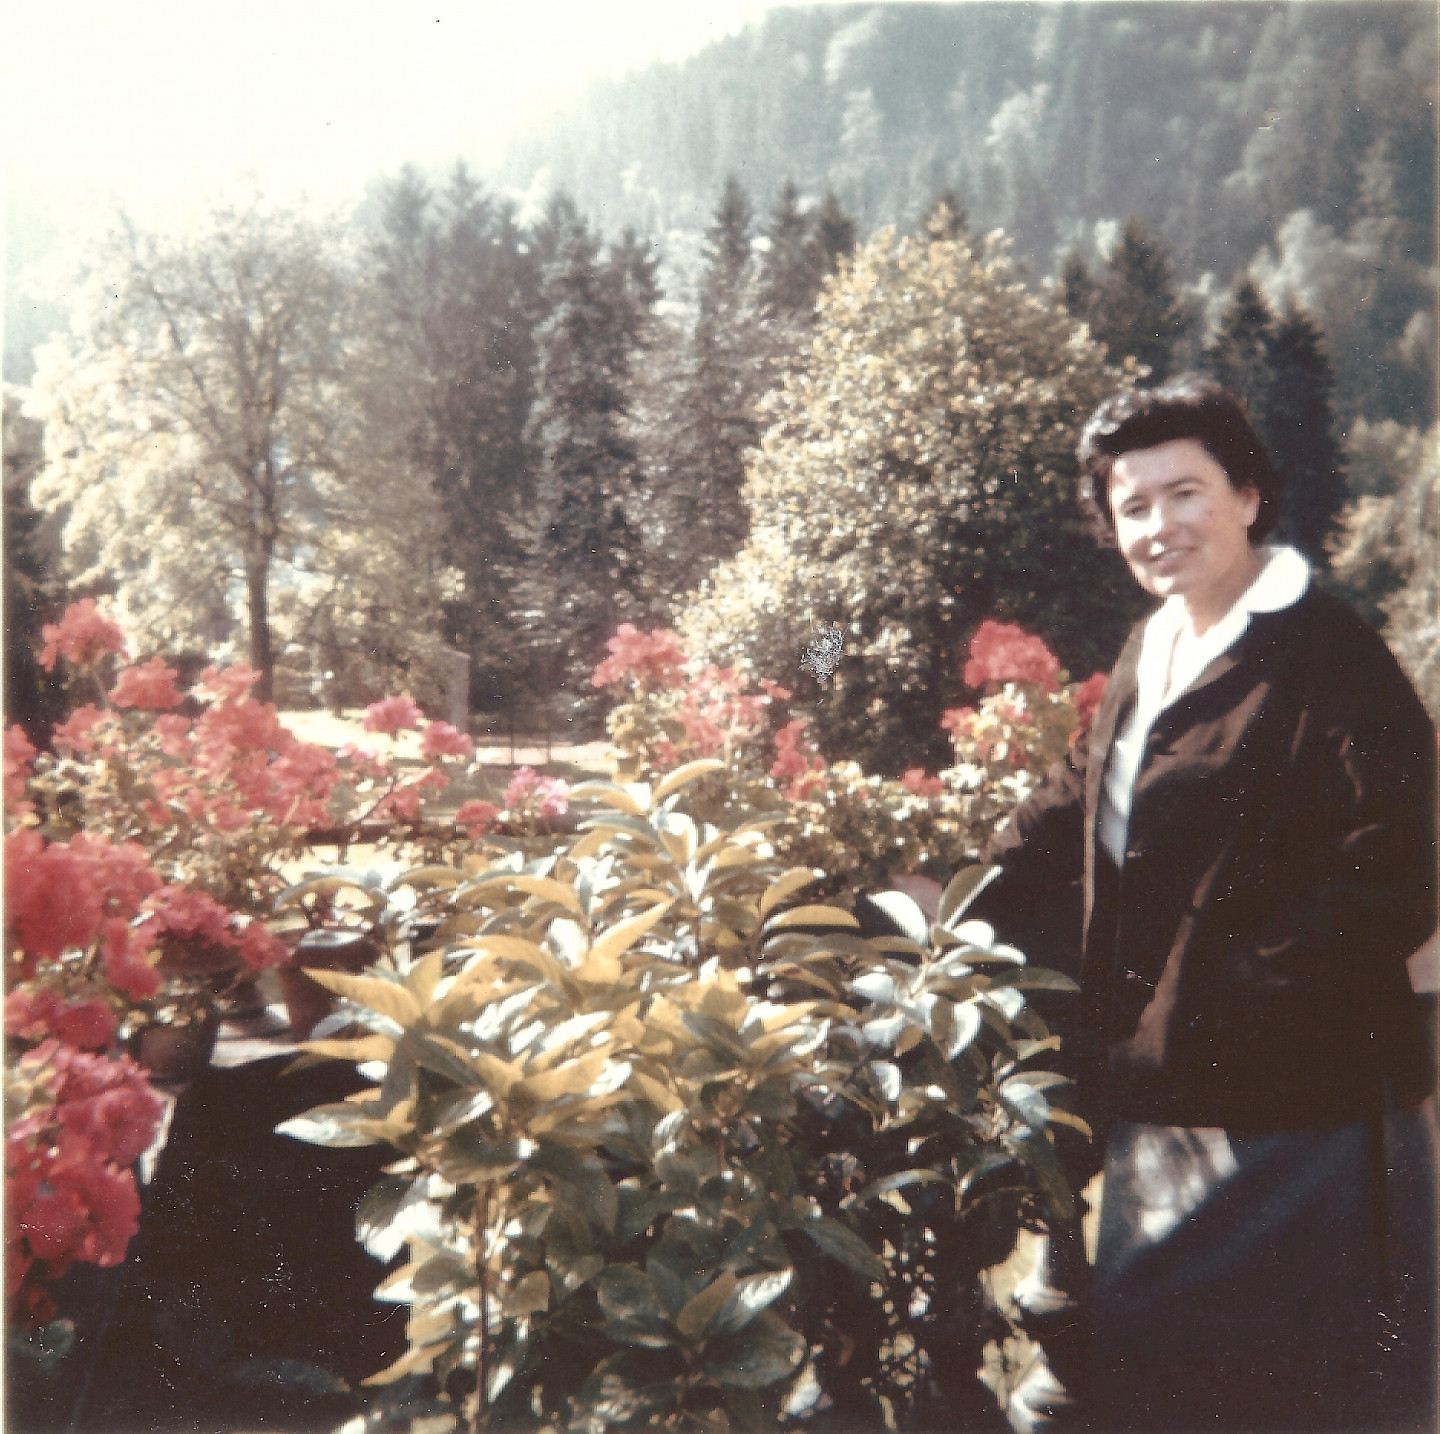 Magda Bittner-Simmet – a trip to the countryside, original photo from the Foundation's picture archive